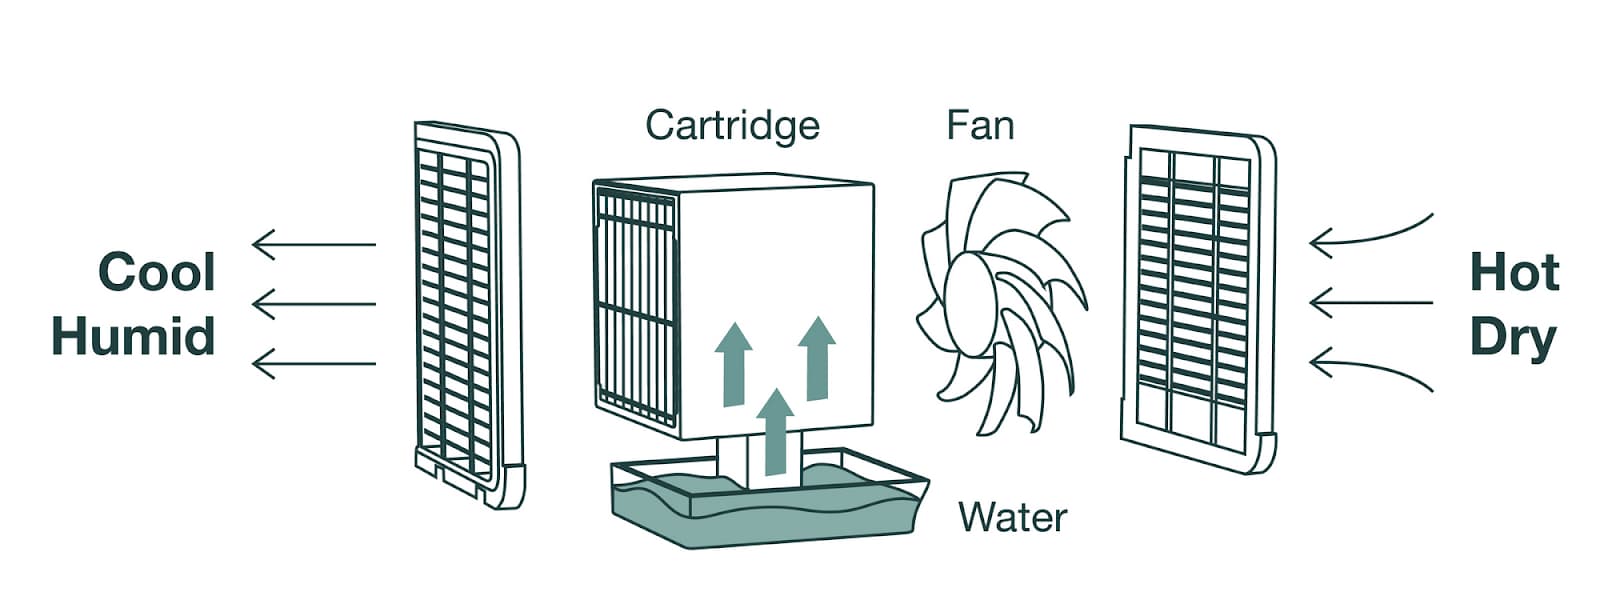 Illustration of the cooling process in a portable evaporative air cooler